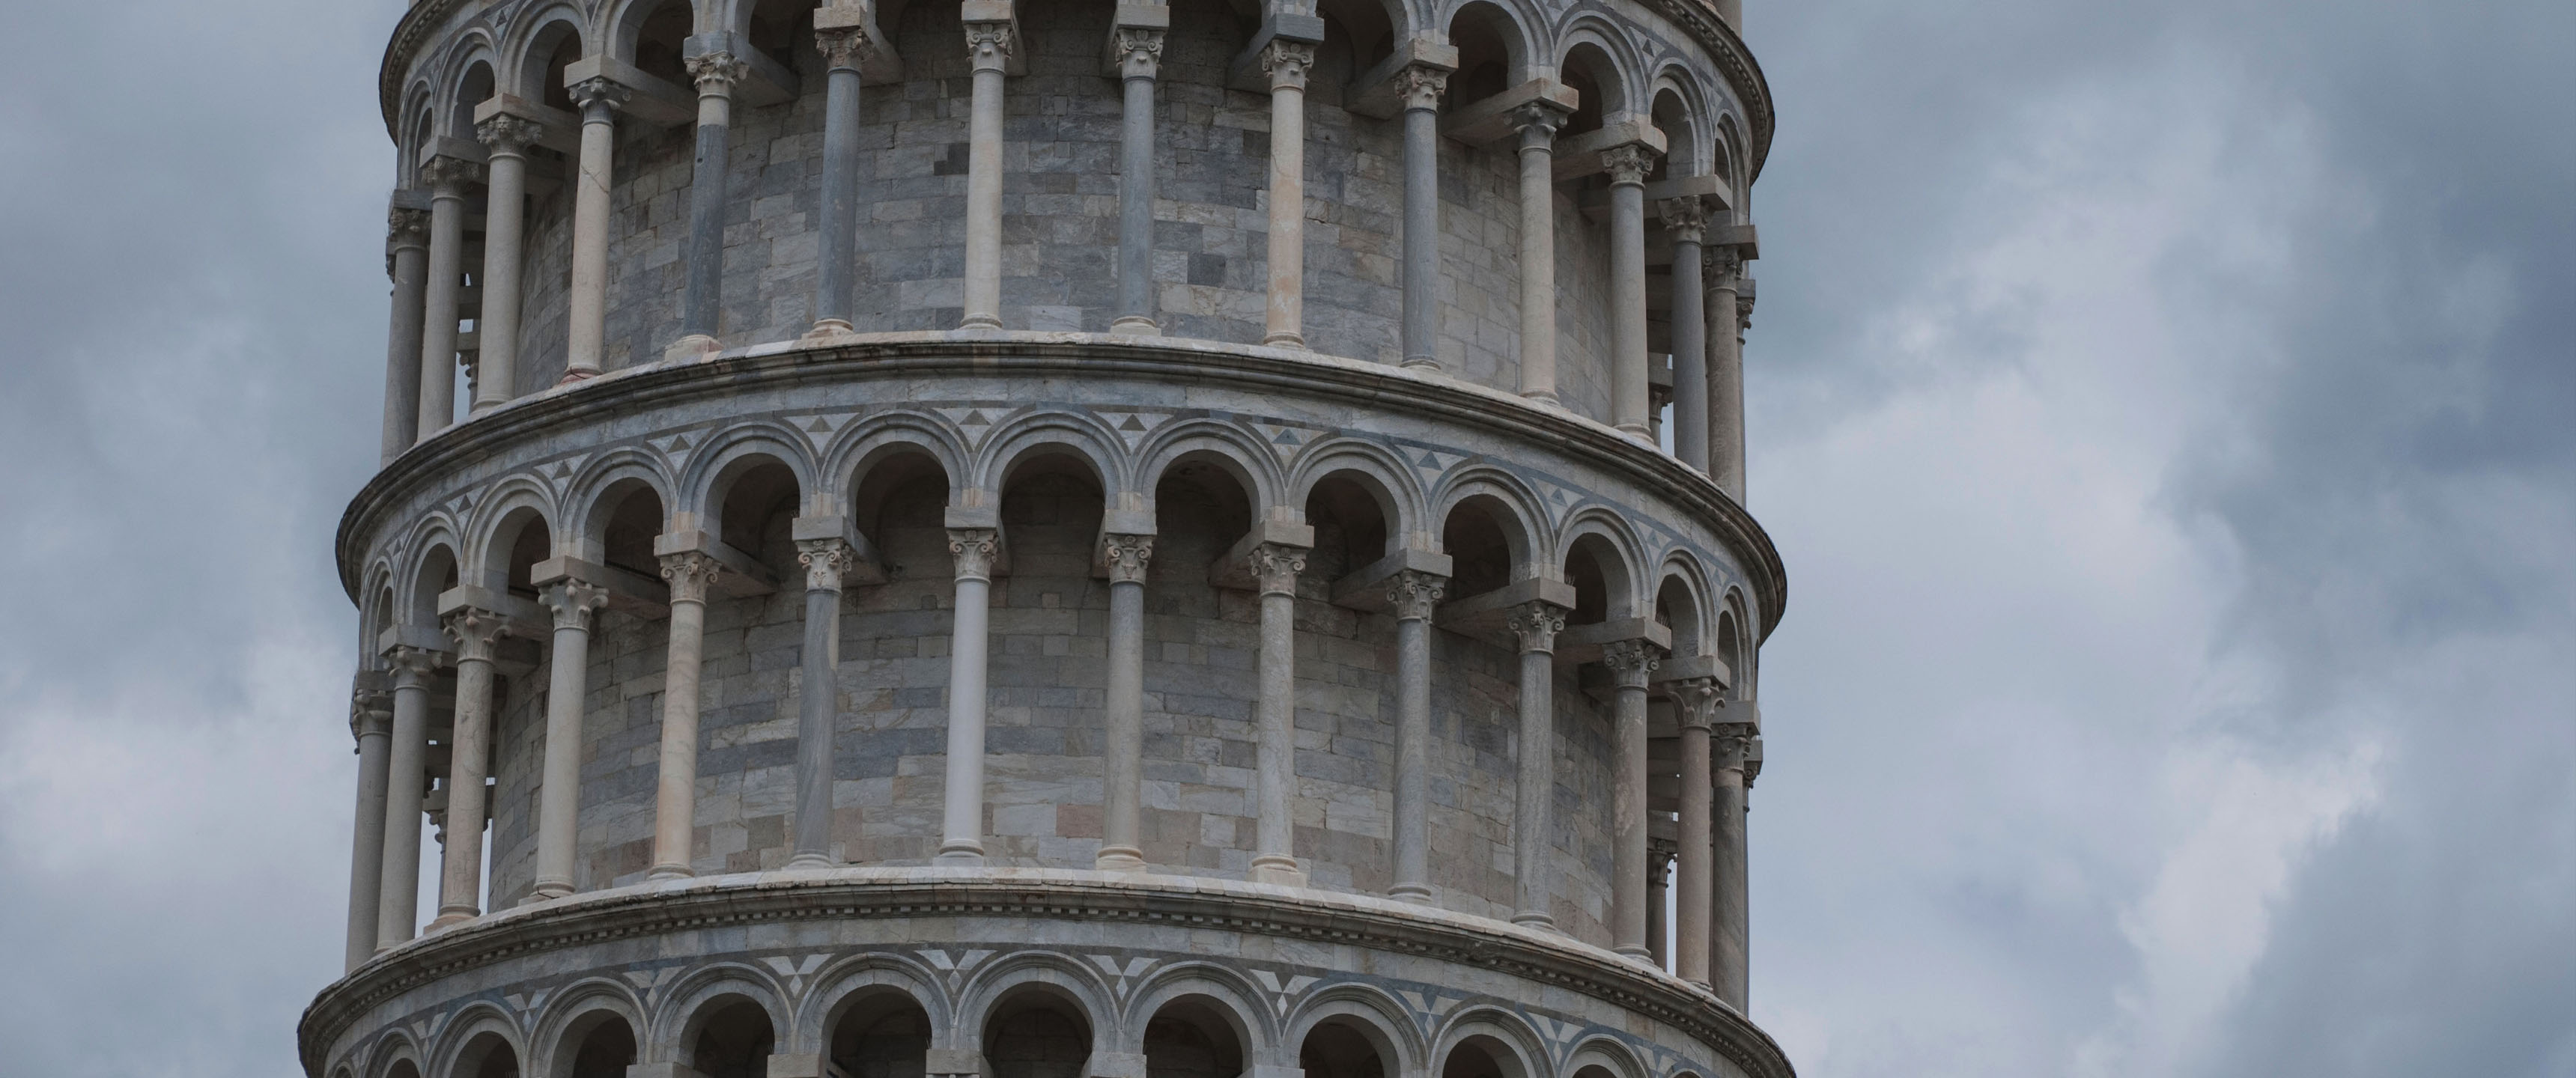 Leaning Tower Of Pisa Architecture 3440x1440